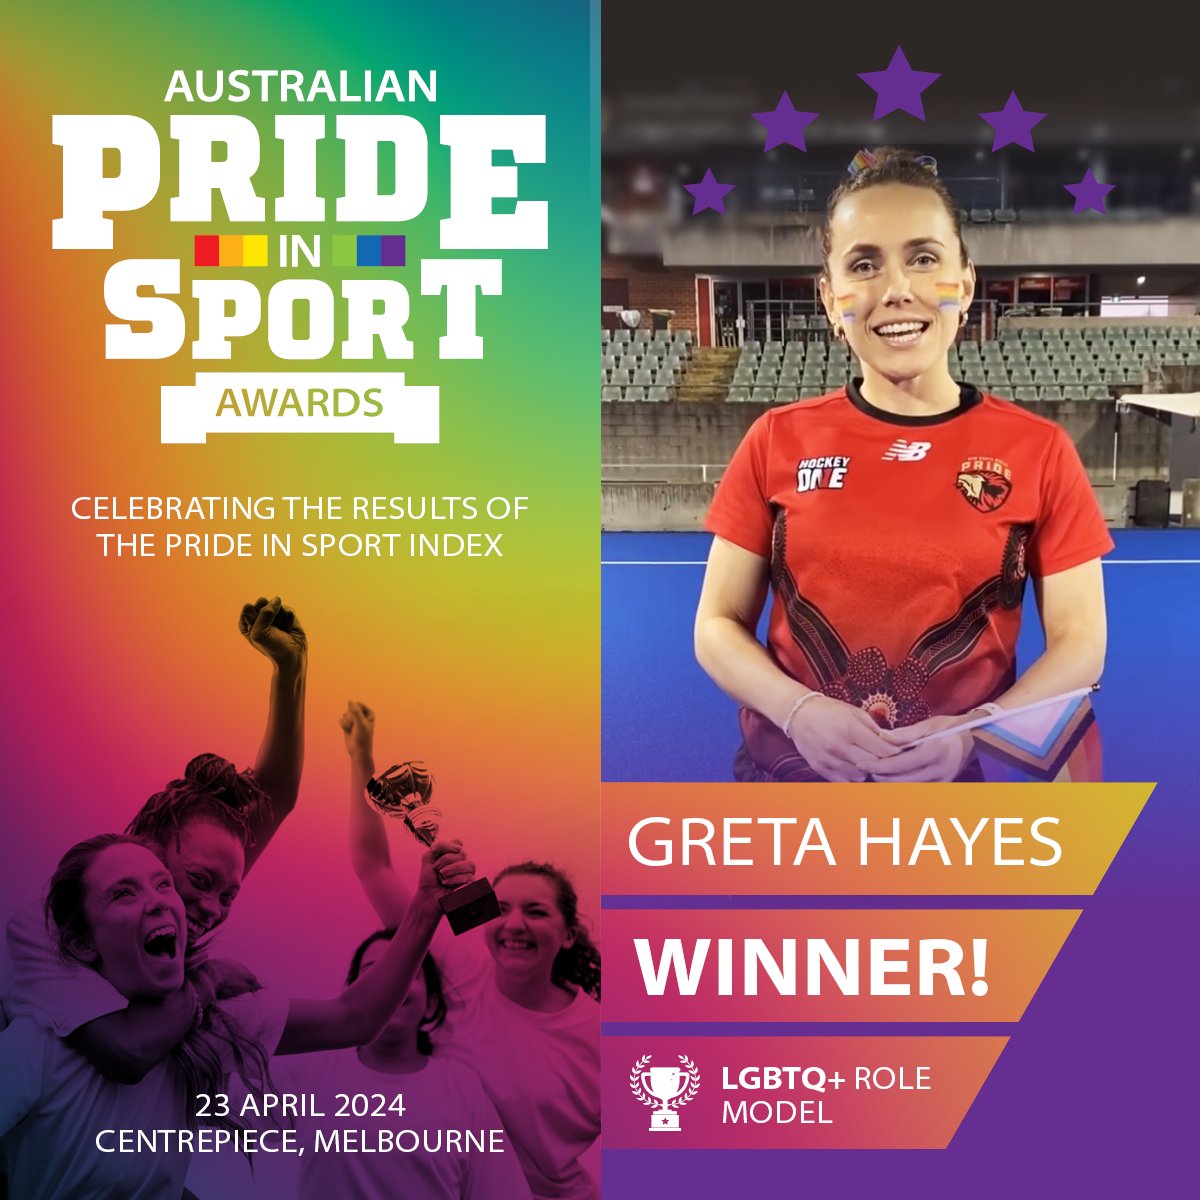 The EU Delegation 🇪🇺 was happy to support 2024 Pride in Sport Awards in Melbourne - a celebration of inclusivity & diversity 🏳️‍🌈 Ambassador @GVisentinEU 🇪🇺 presented the award to LGBTQ+ Role Model of the Year: Greta Hayes, for her inspiring work in the community 👏 #EUinAUS